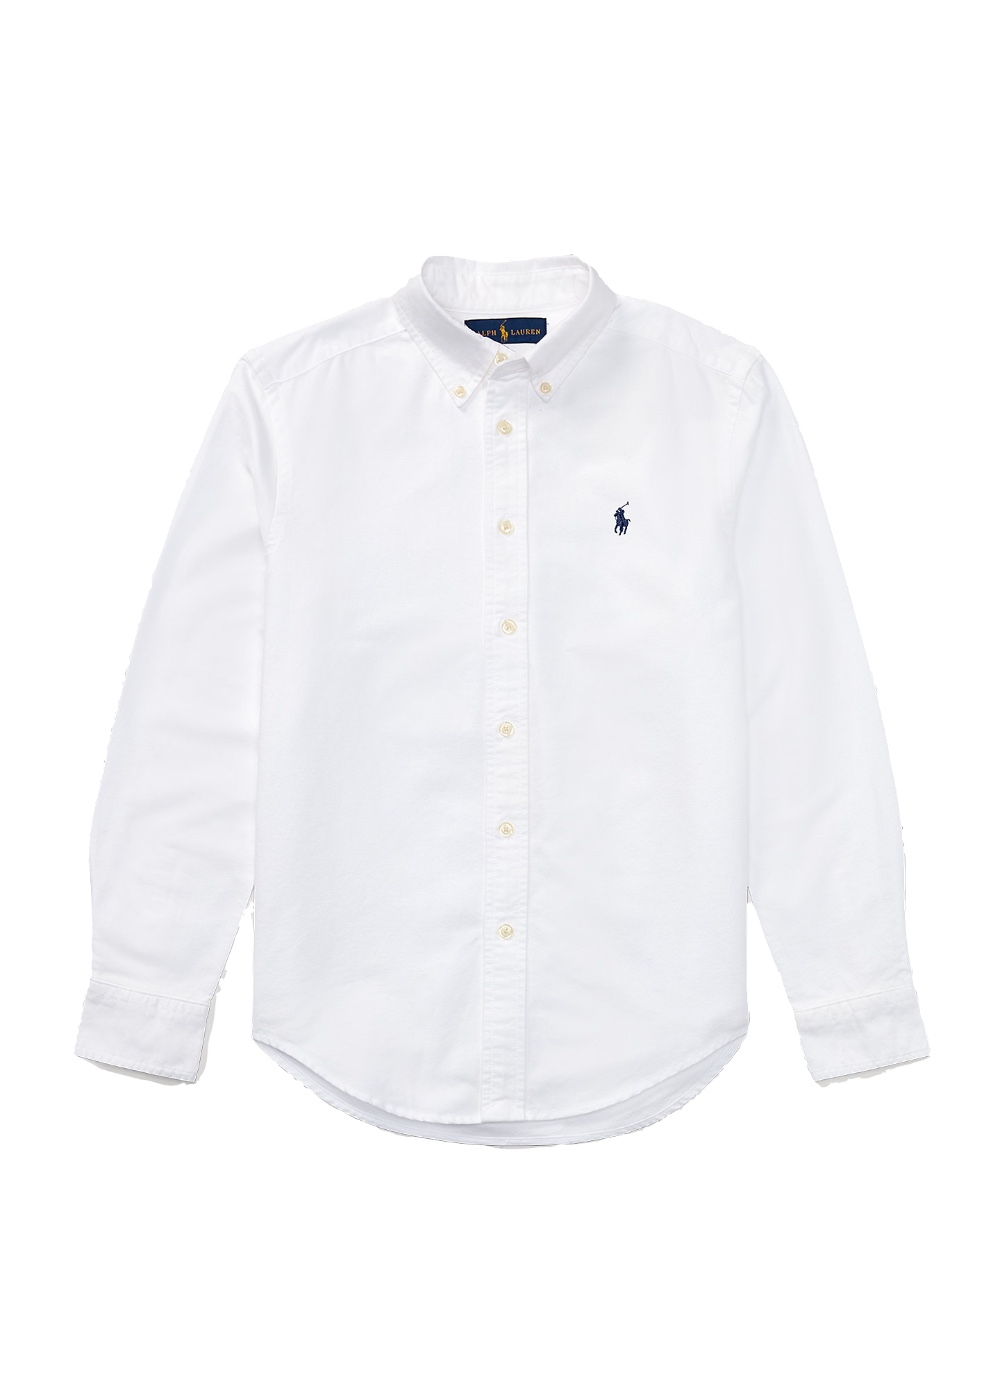 Featured image for “POLO RALPH LAUREN CAMICIA OXFORD”